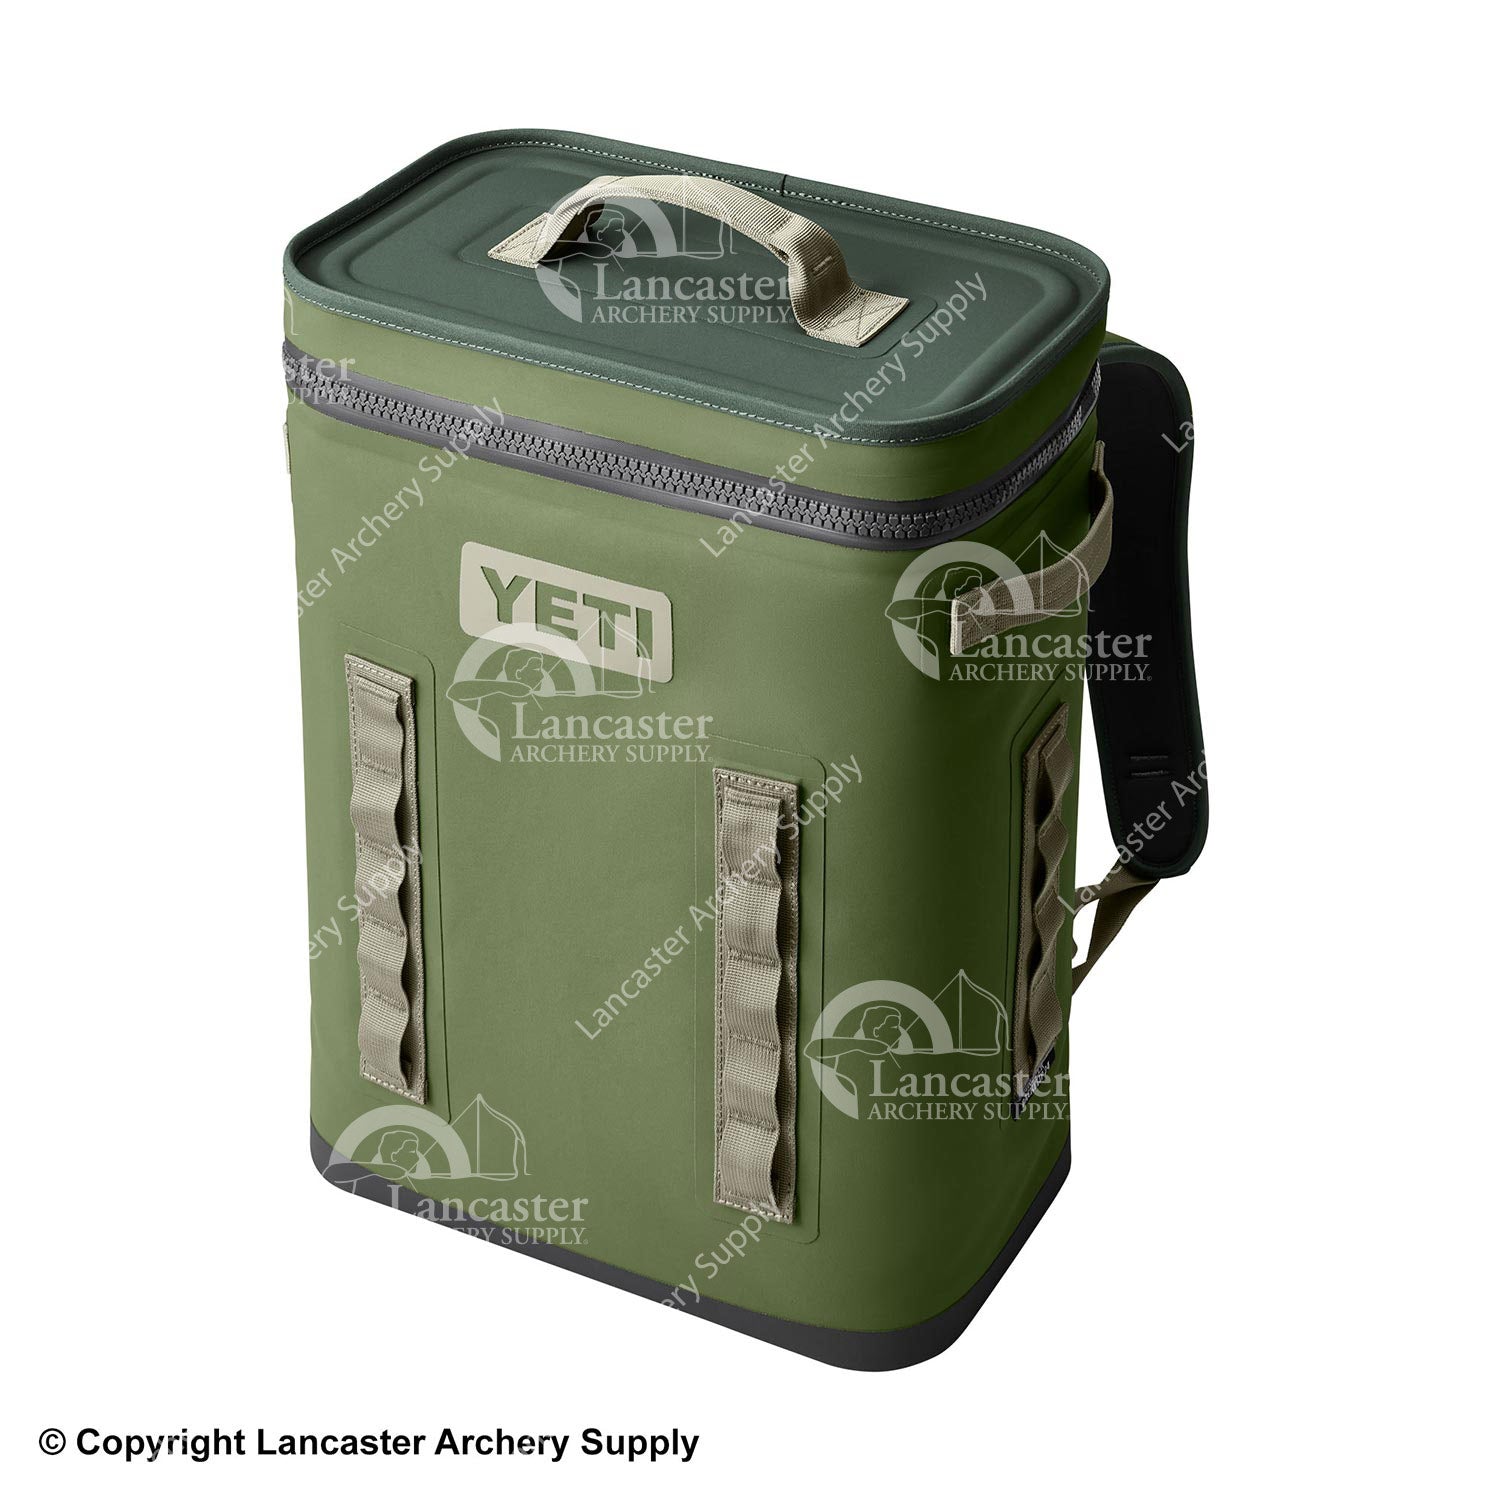 YETI Hopper Backflip 24 Insulated Backpack Cooler, Highlands Olive in the  Portable Coolers department at